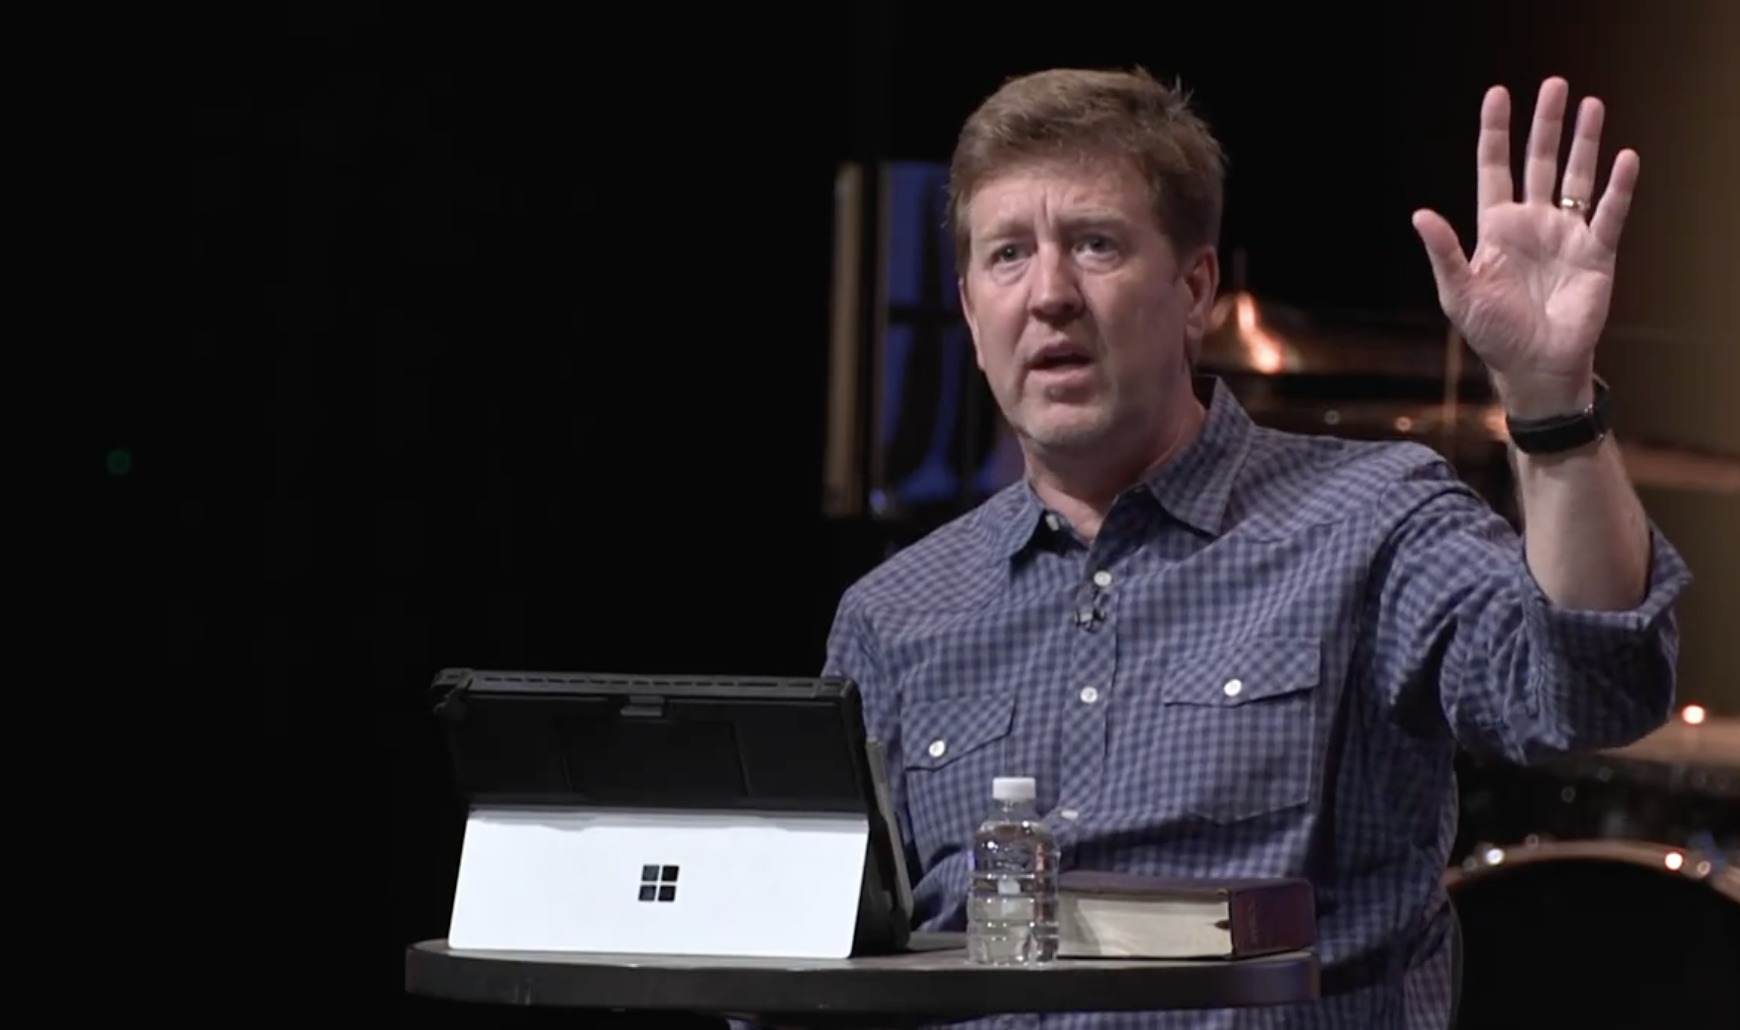 Megachurch pastor says it's 'very unloving' for Christians to affirm friends' LGBT lifestyles